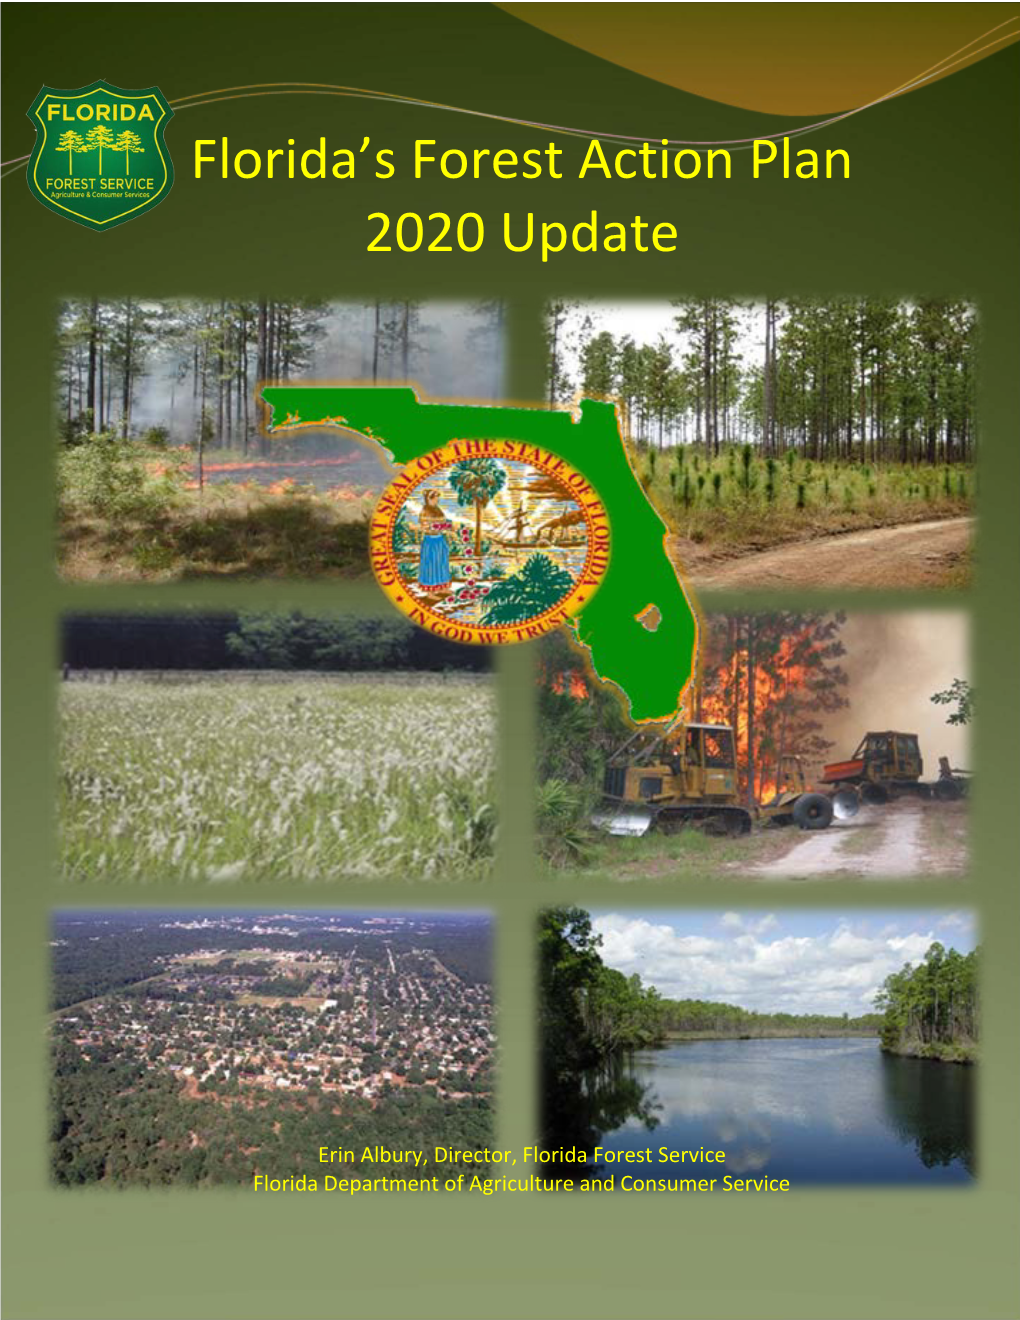 Florida's Forest Action Plan 2020 Update